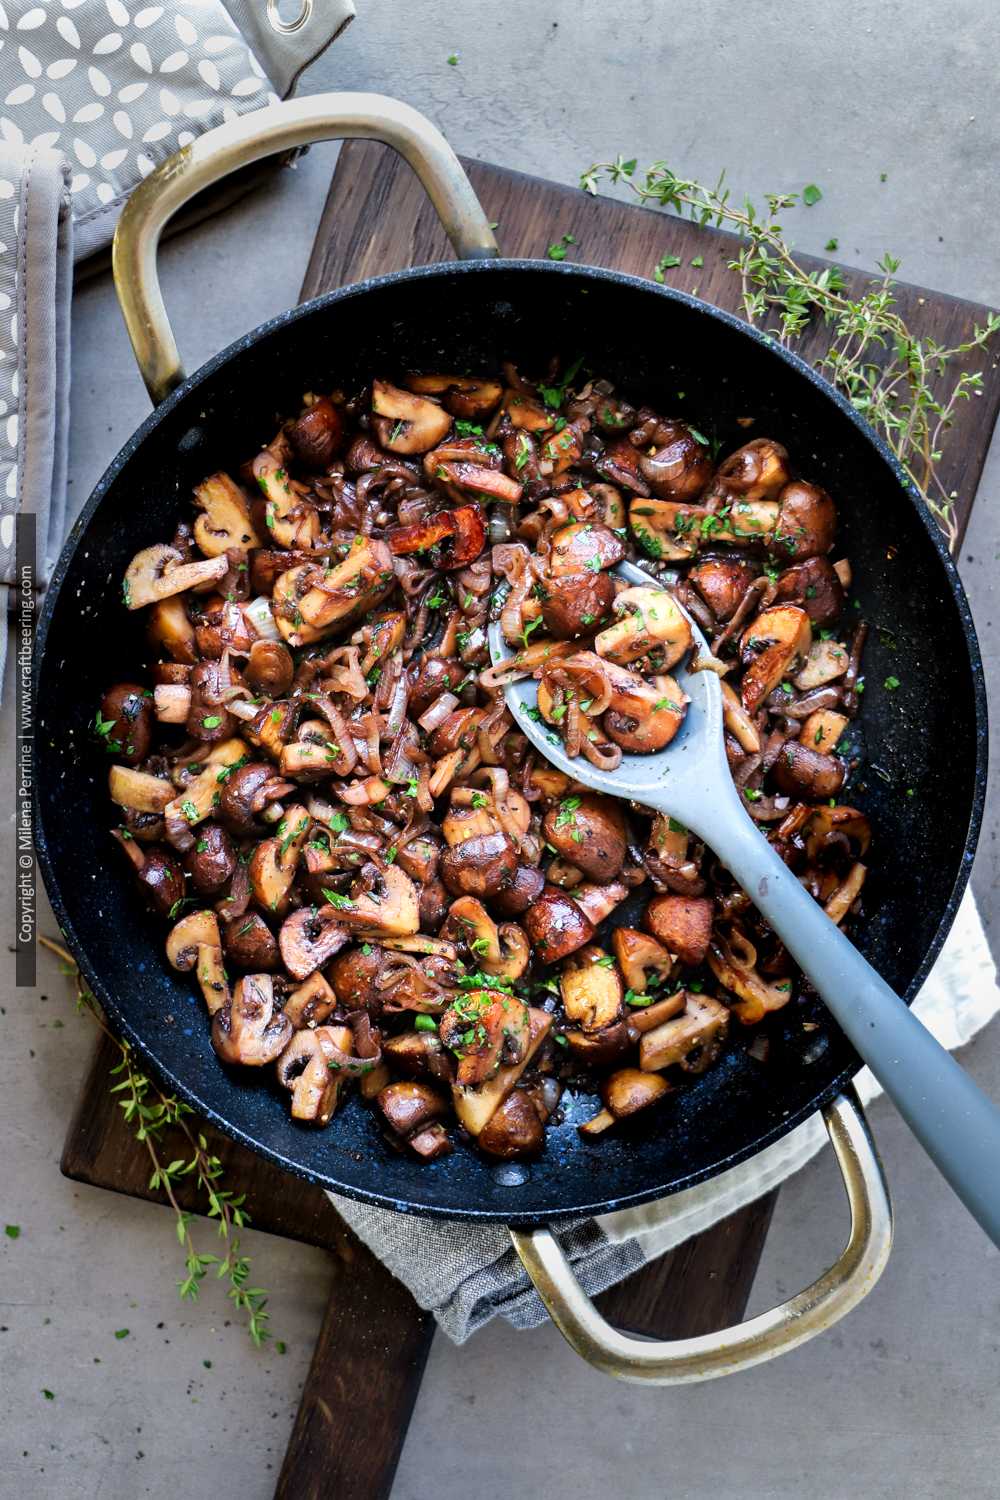 Skillet sauteed mushrooms and onions for steak.